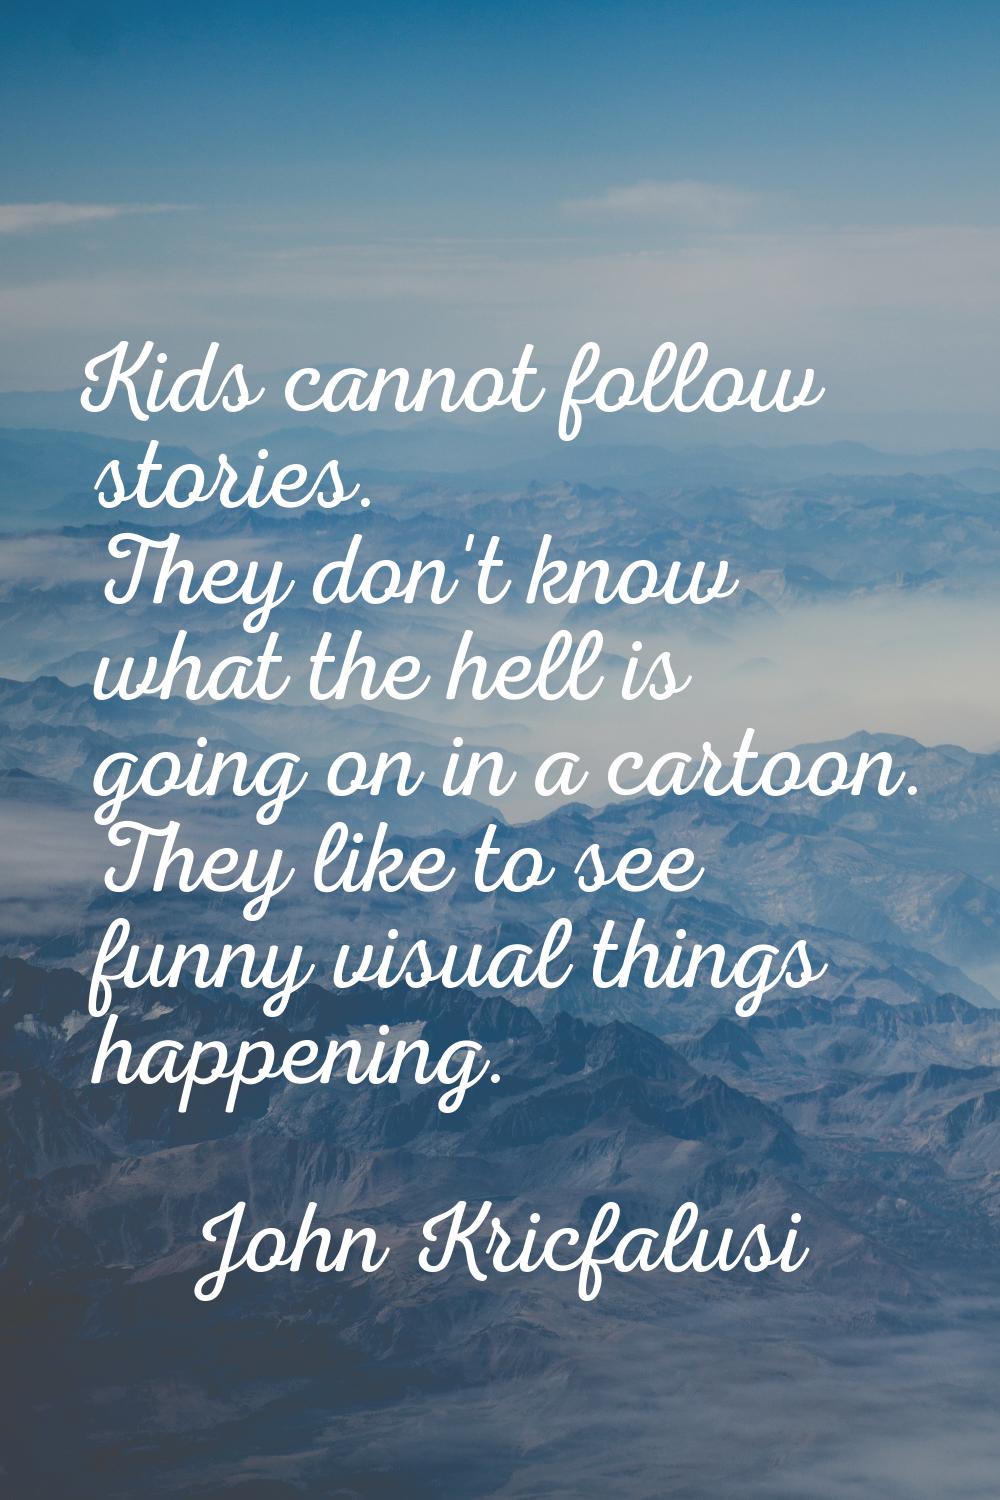 Kids cannot follow stories. They don't know what the hell is going on in a cartoon. They like to se